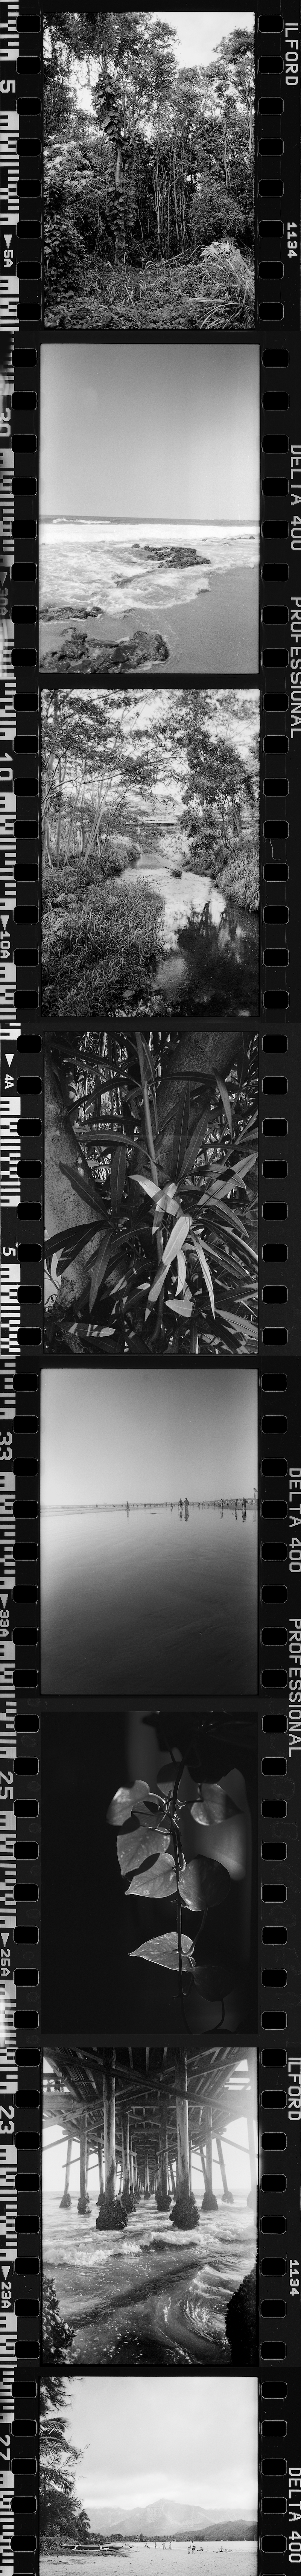 Black and white images of tropical plants and beach  in Kauai with film reel frames